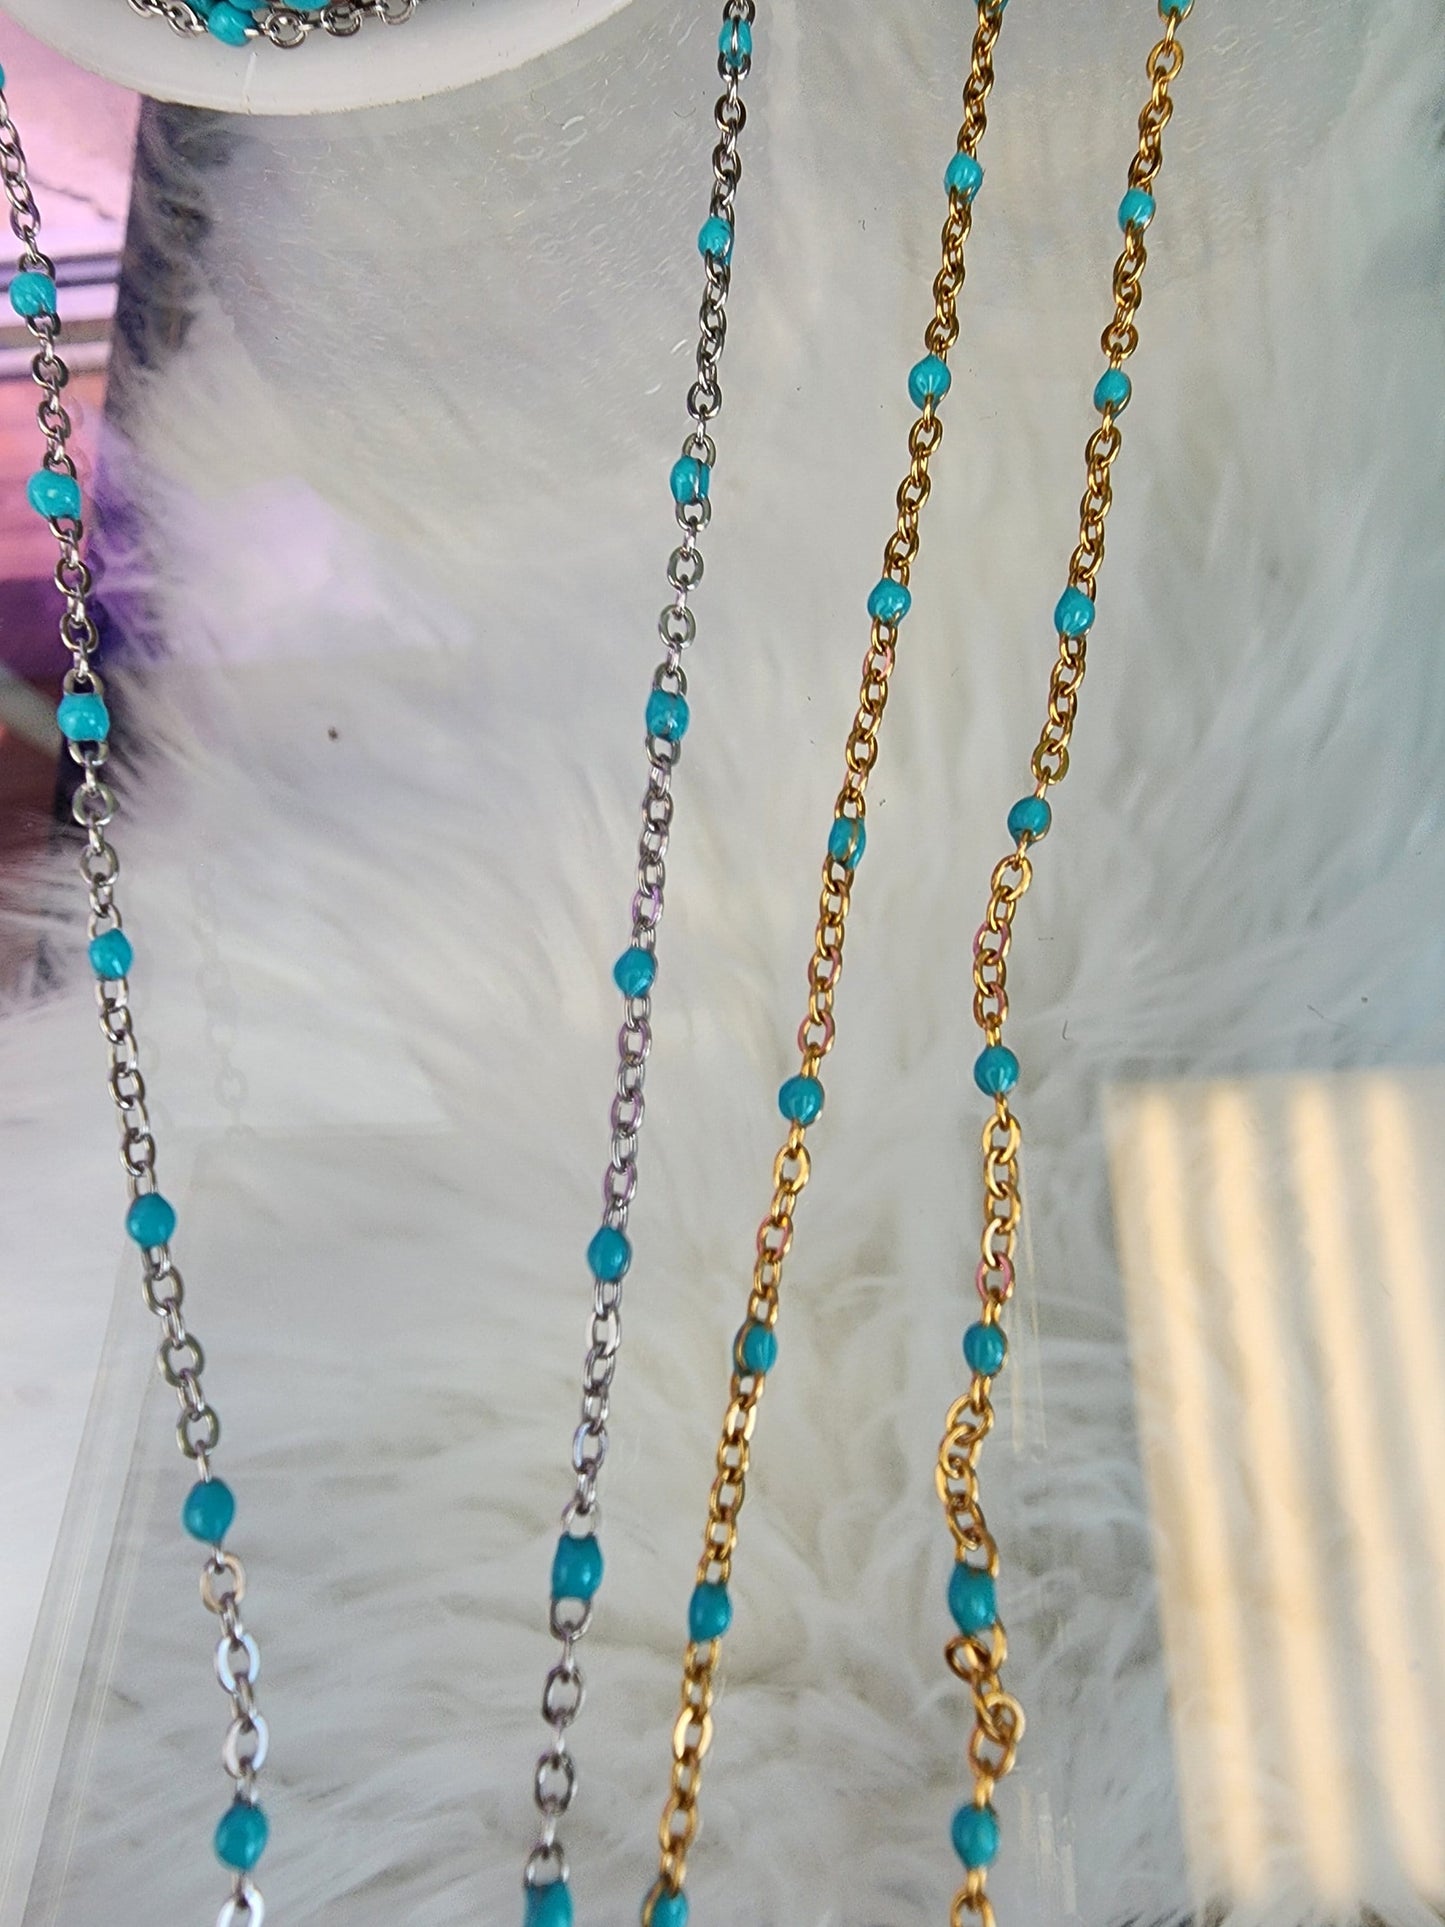 Light Blue or Aqua  Enamel Chain multicolor bulk chain chain for permanent jewelry Supply wholesale bead and cable gold or silver